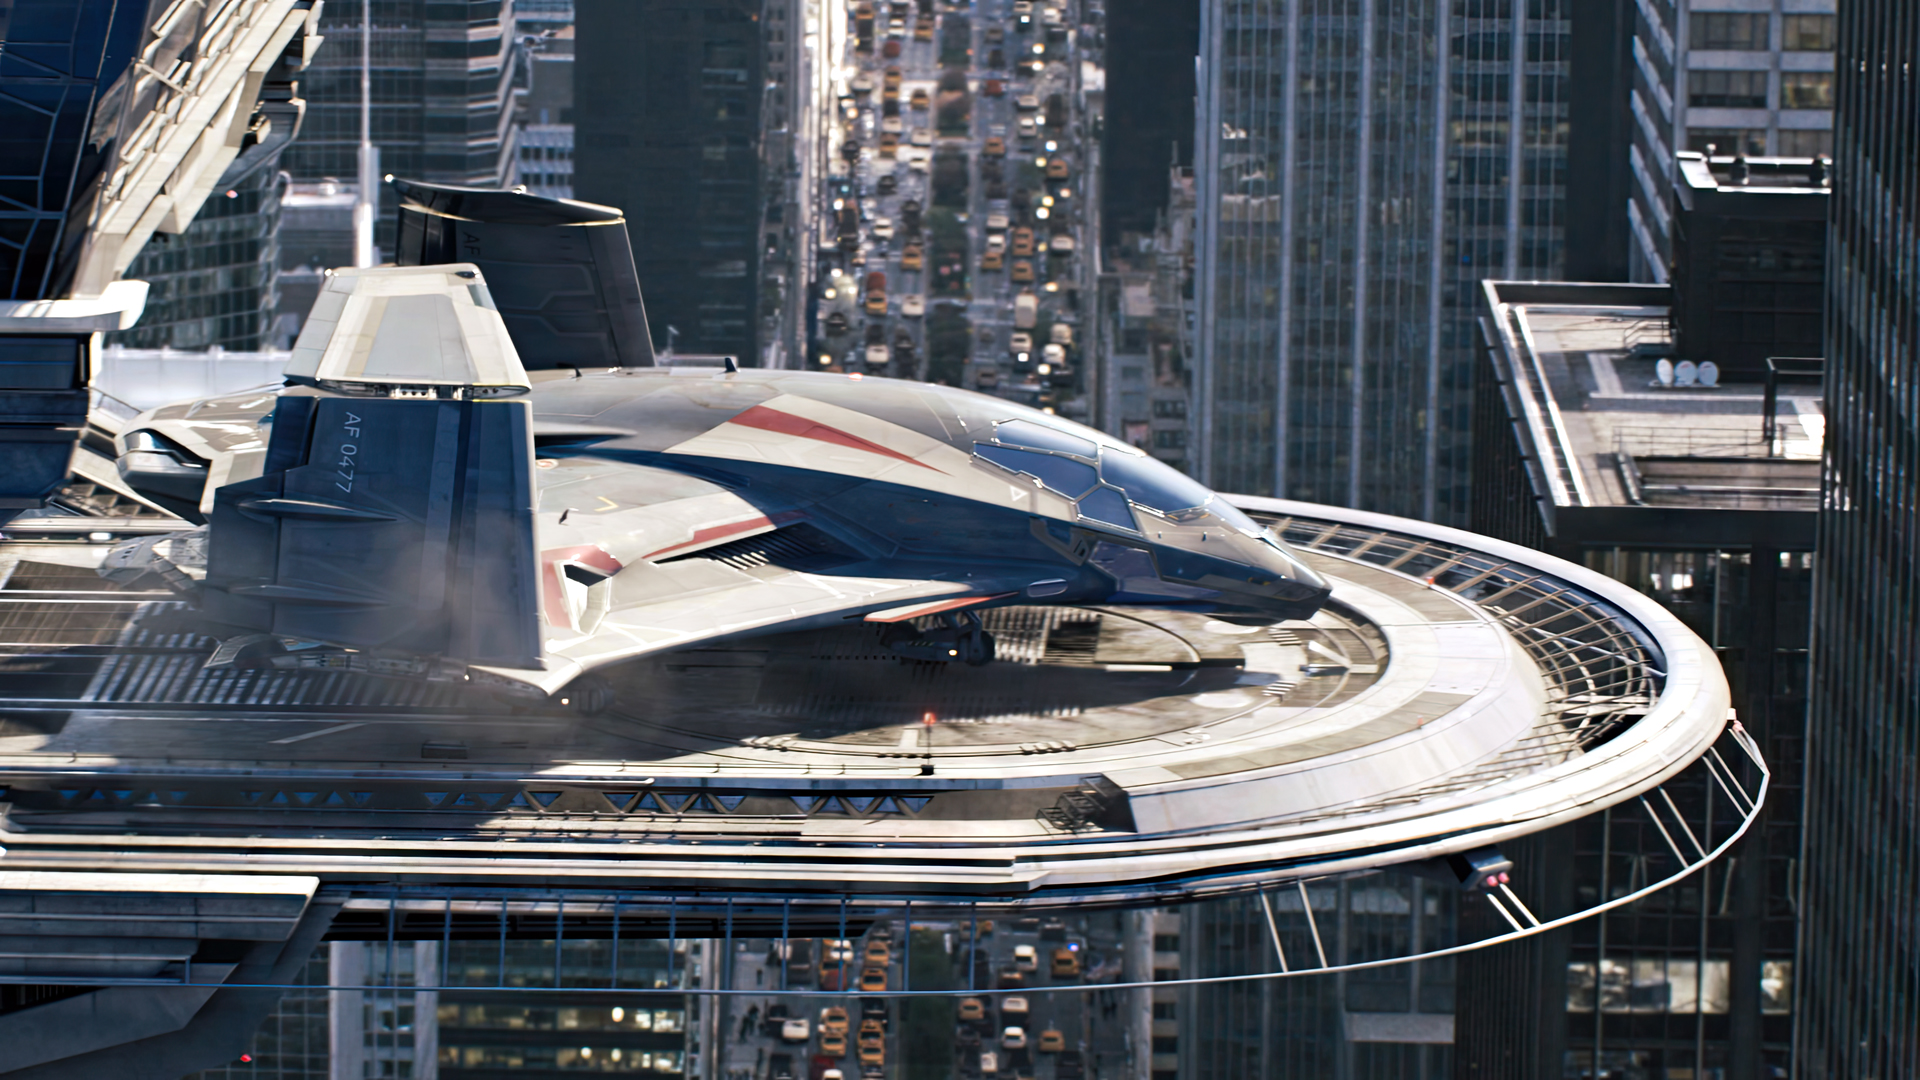 Avengers Age Of Ultron Movies Film Stills Quinjet Aircraft Street New York City Avengers Tower Taxi  1920x1080